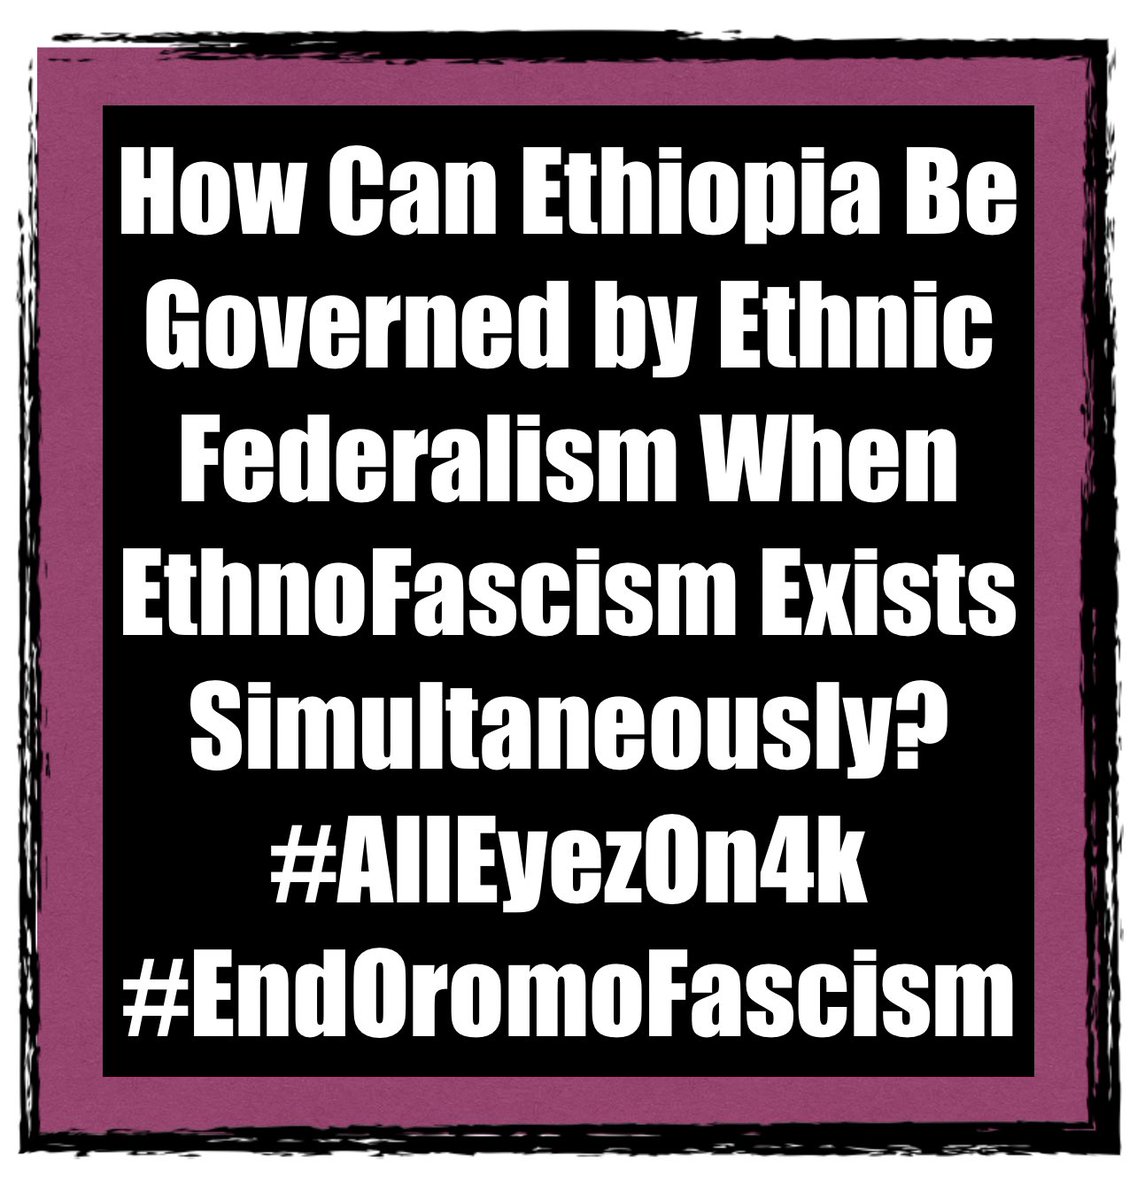 How can #Ethiopia be Governed by Ethnic Federalism when Ethno-Fascism exists simultaneously?

#AllEyezOn4k
#EndOromoFascism

#AmharaRevolution #StateSponsoredAmharaGenocide